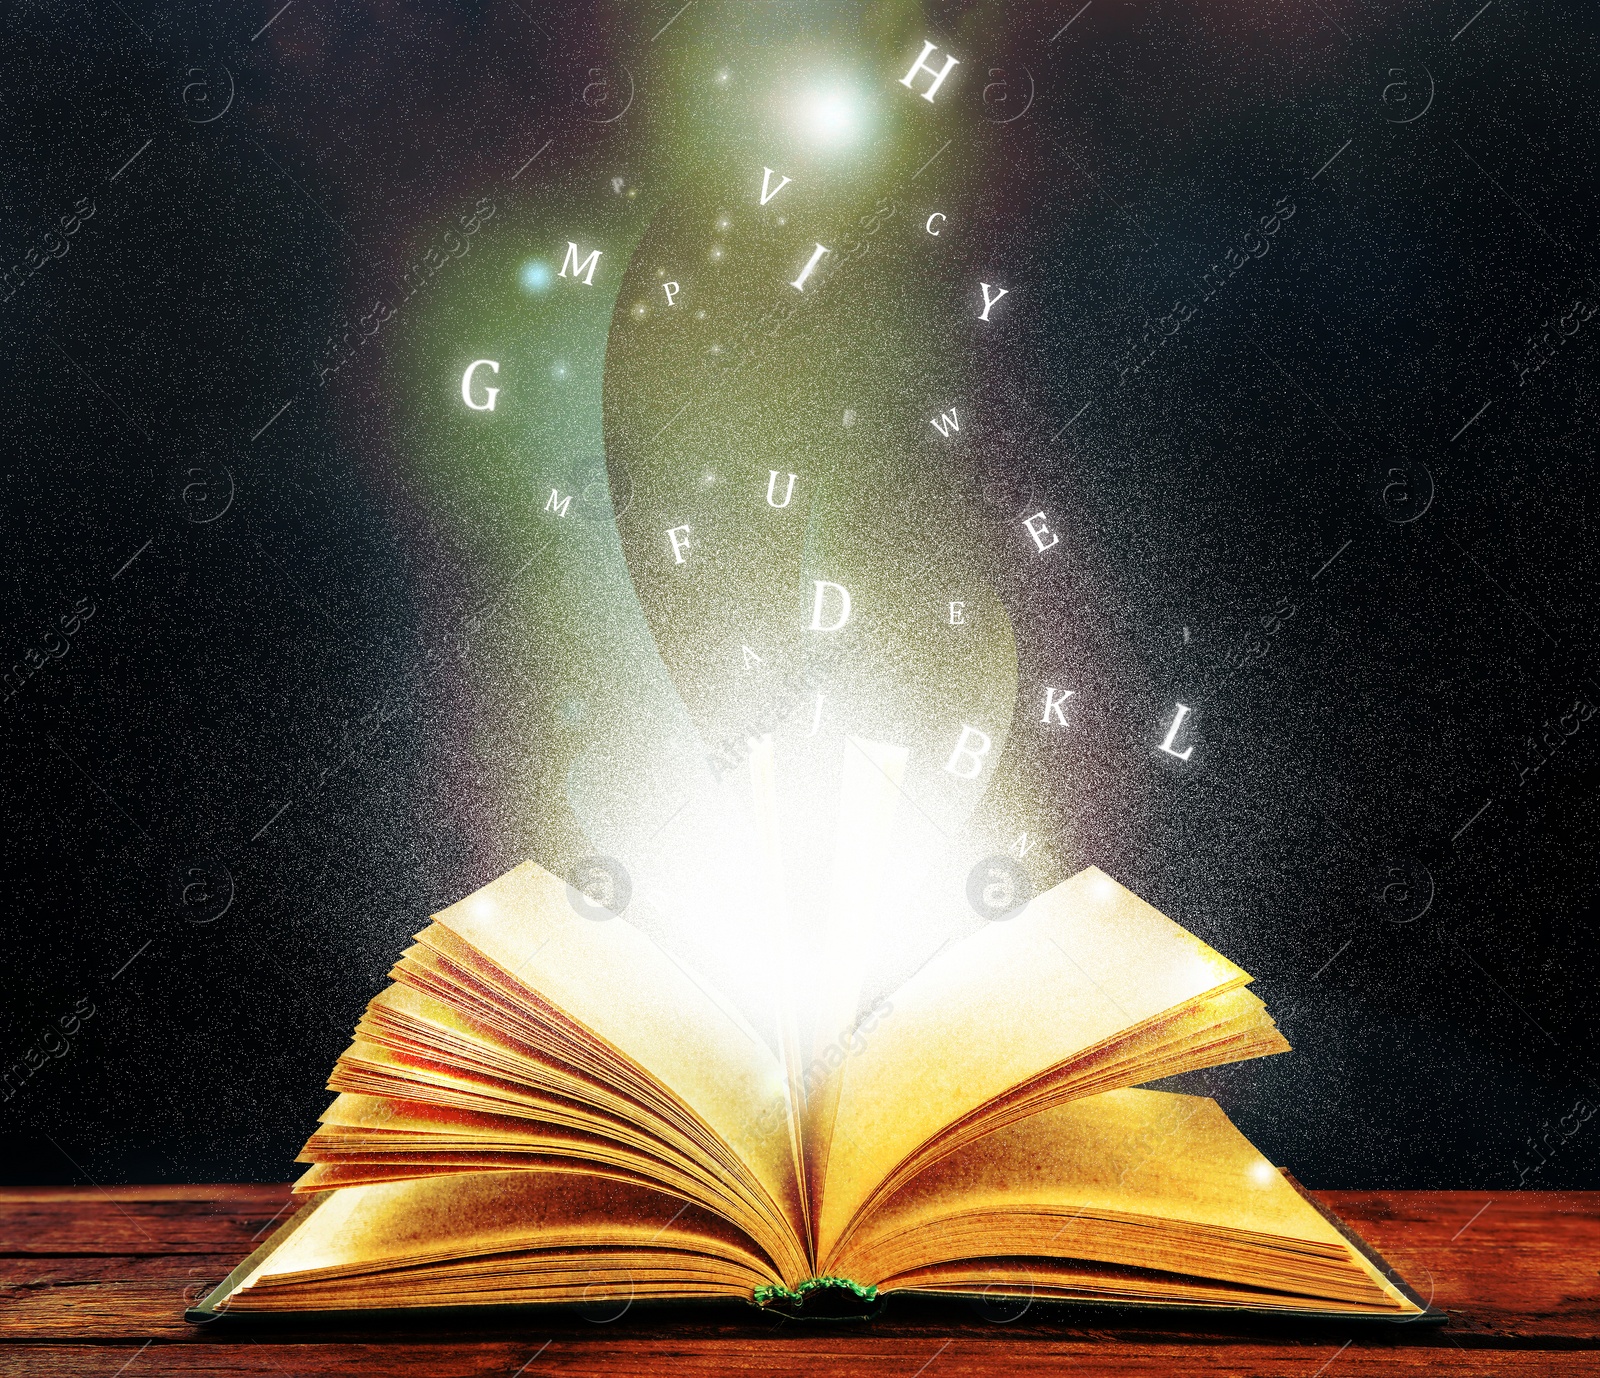 Image of Open book with magic light and glowing letters flying out of it on wooden table against black background